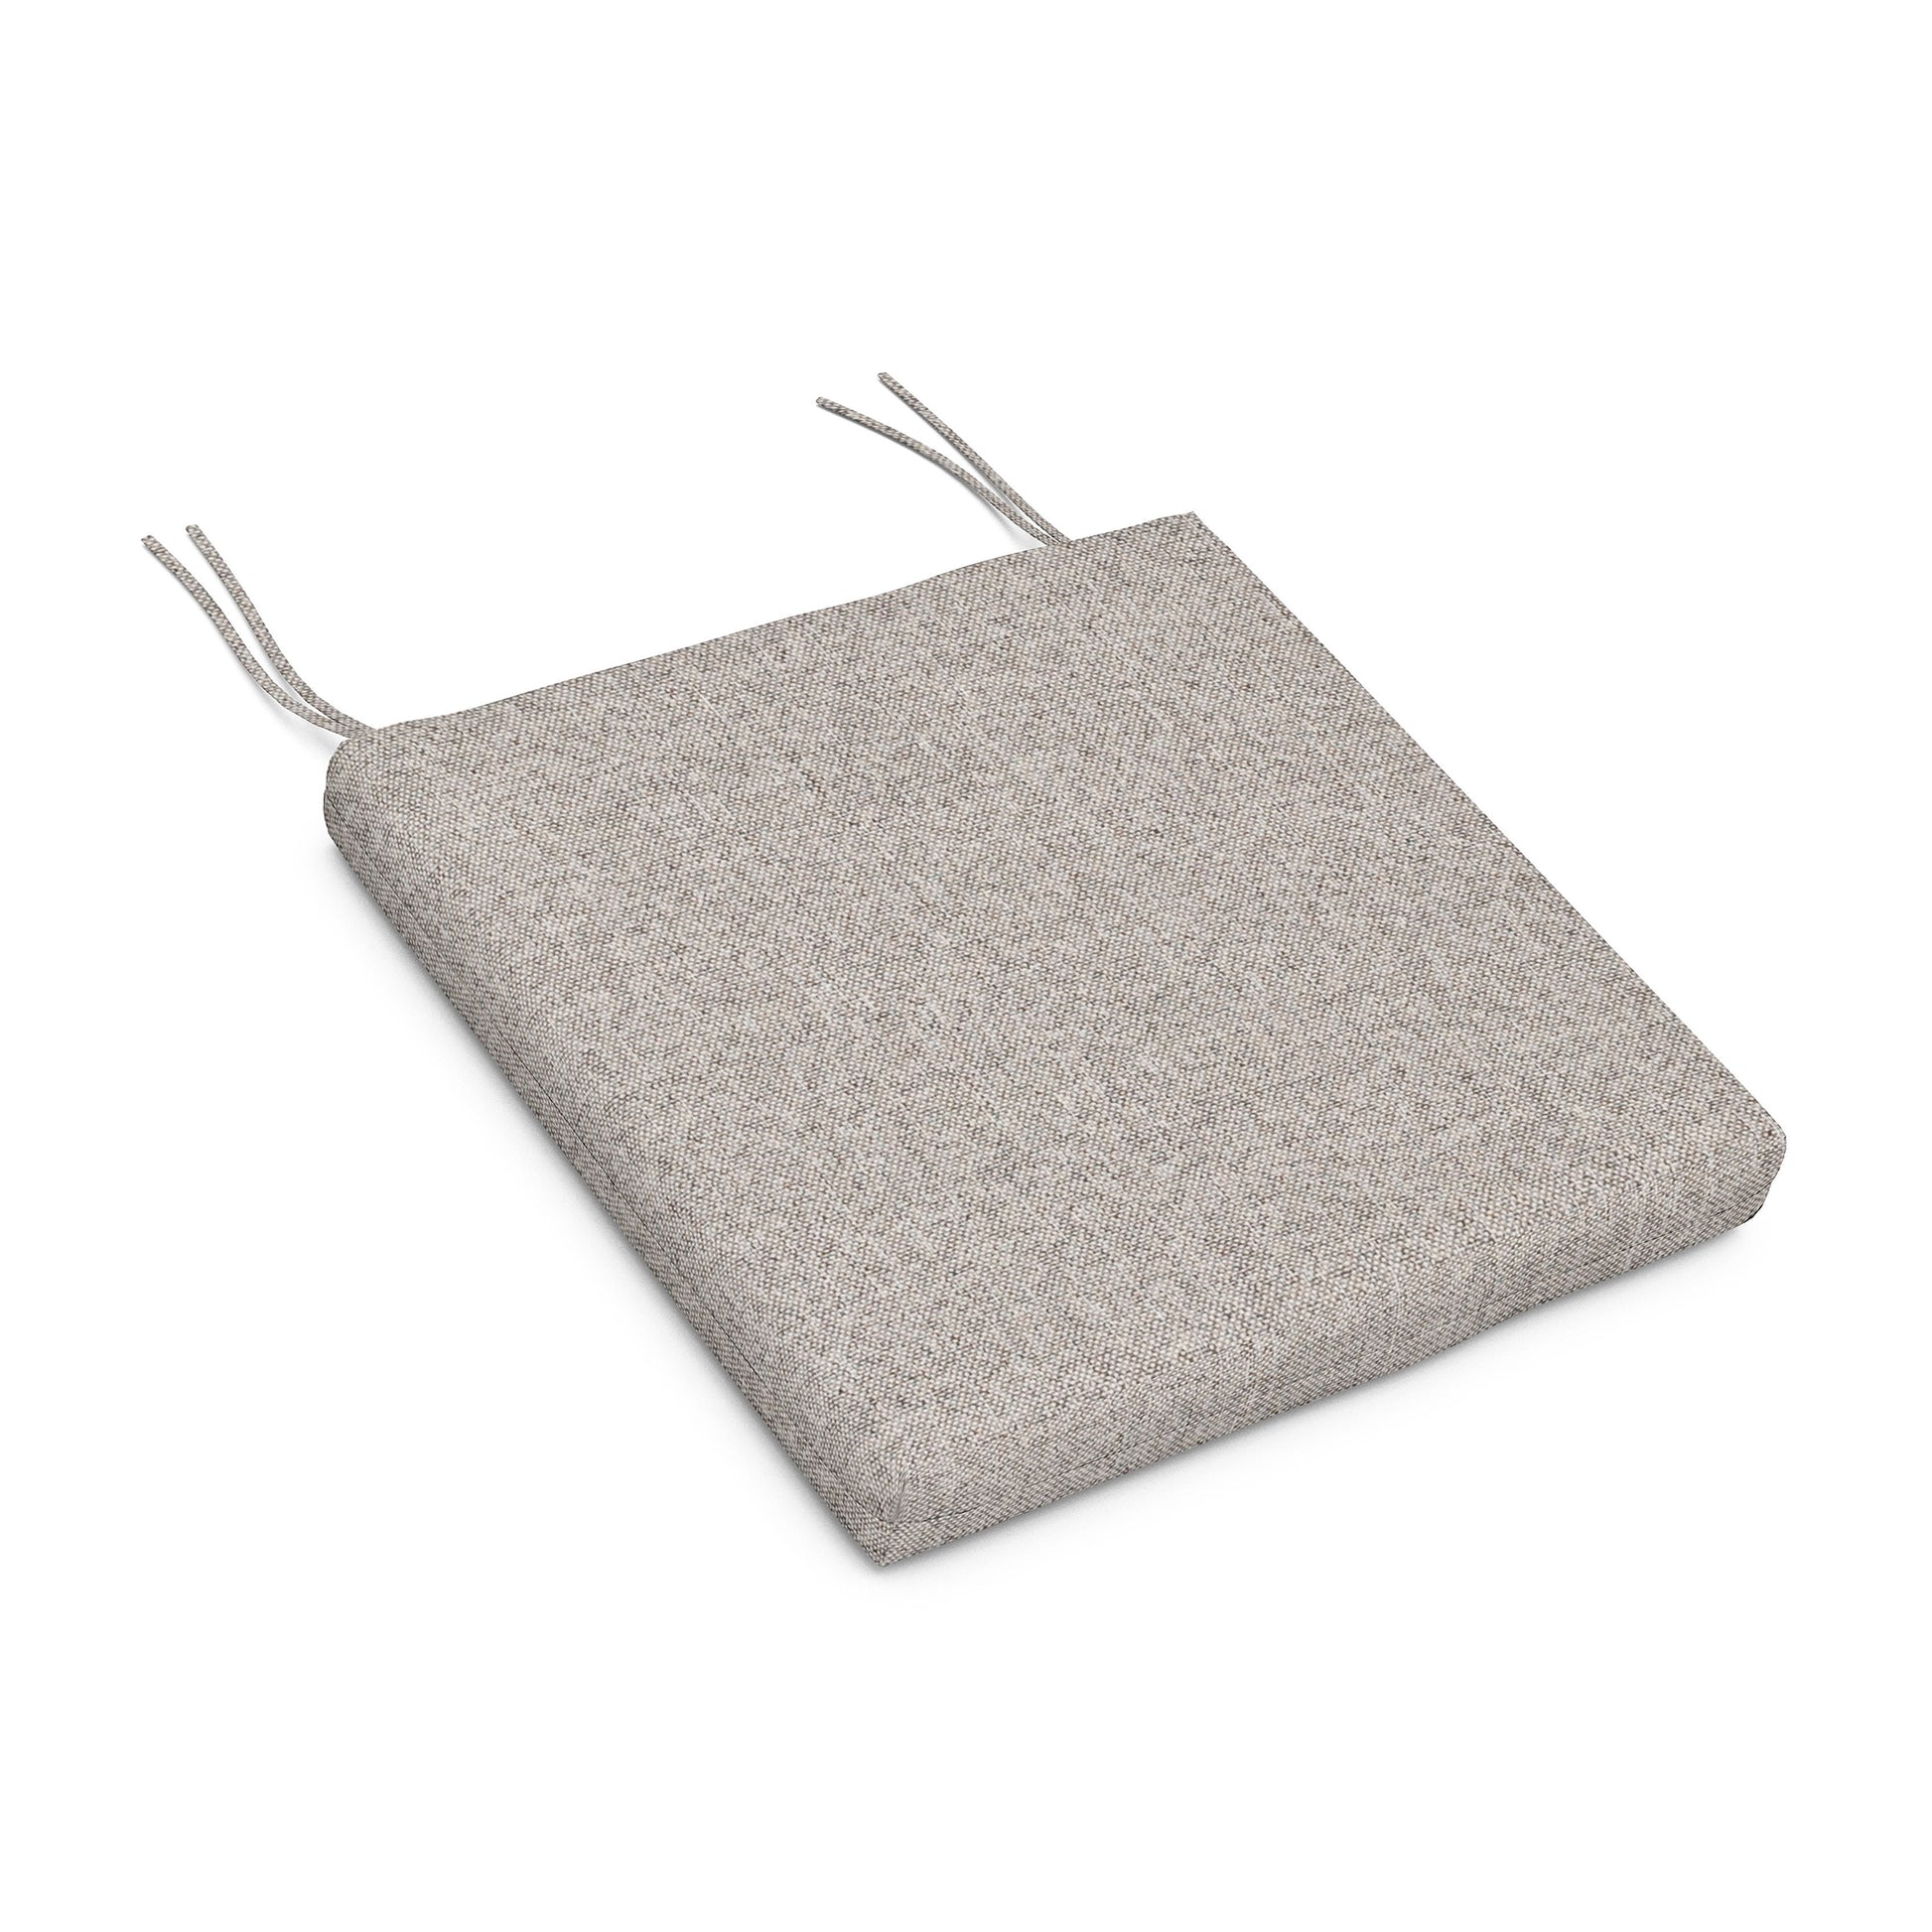 A square, gray, weather-resistant upholstery fabric cushion with two protruding strings, isolated on a white background by POLYWOOD's XPWS0007 - Seat Cushion.